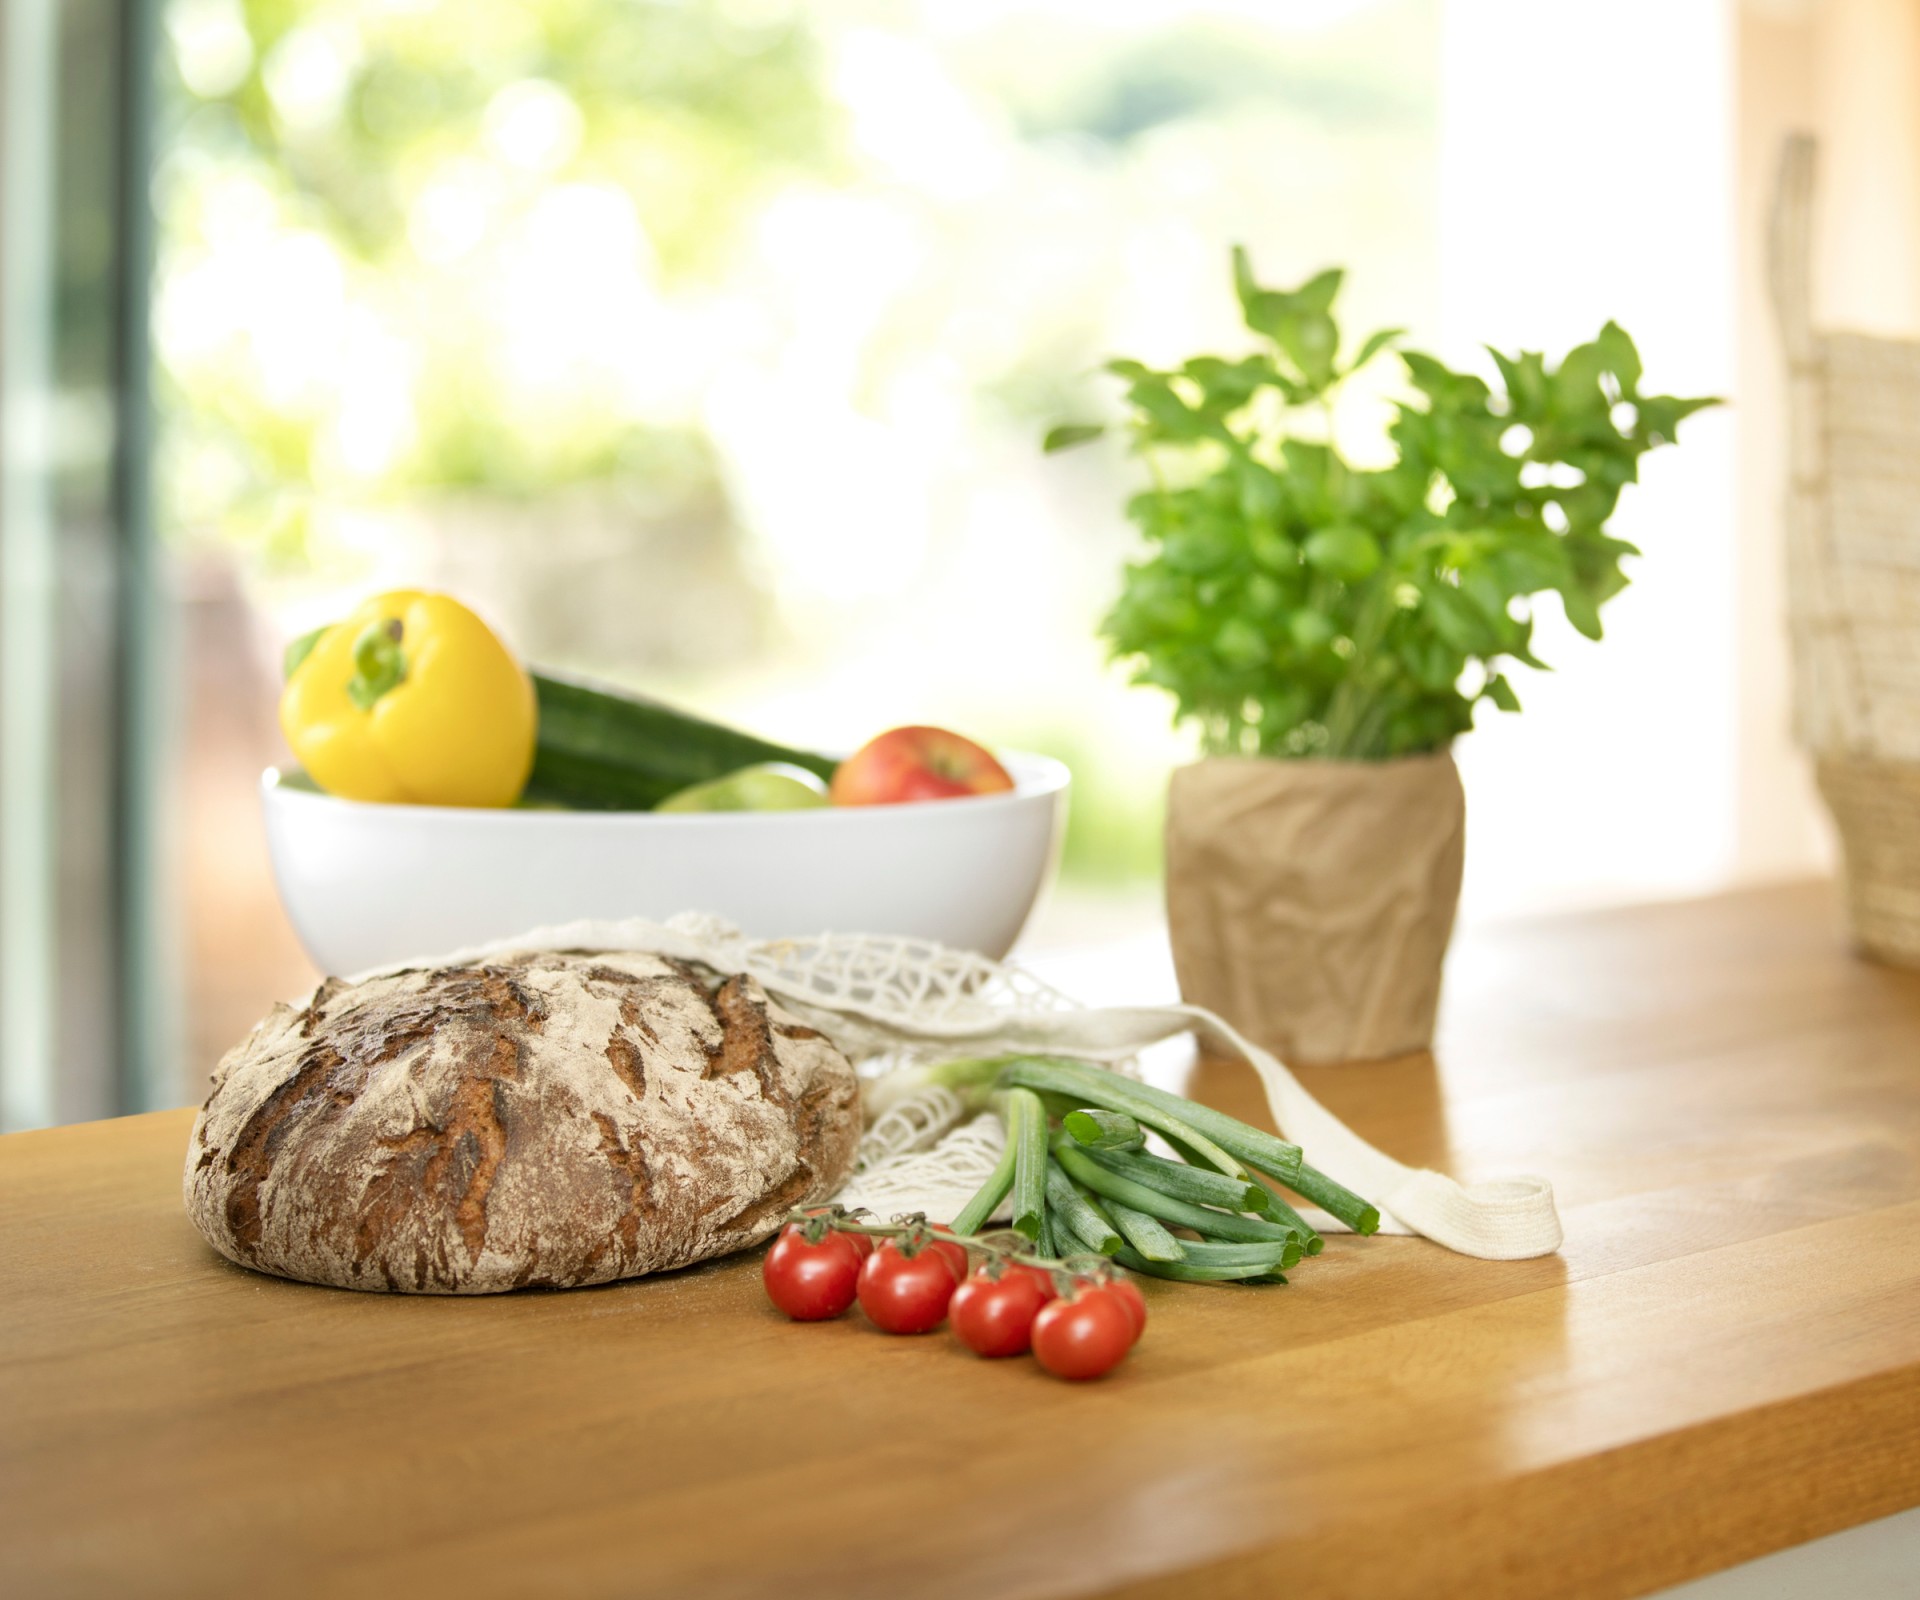 Bread, tomatoes, basil and a bowl with vegetables on a wooden table